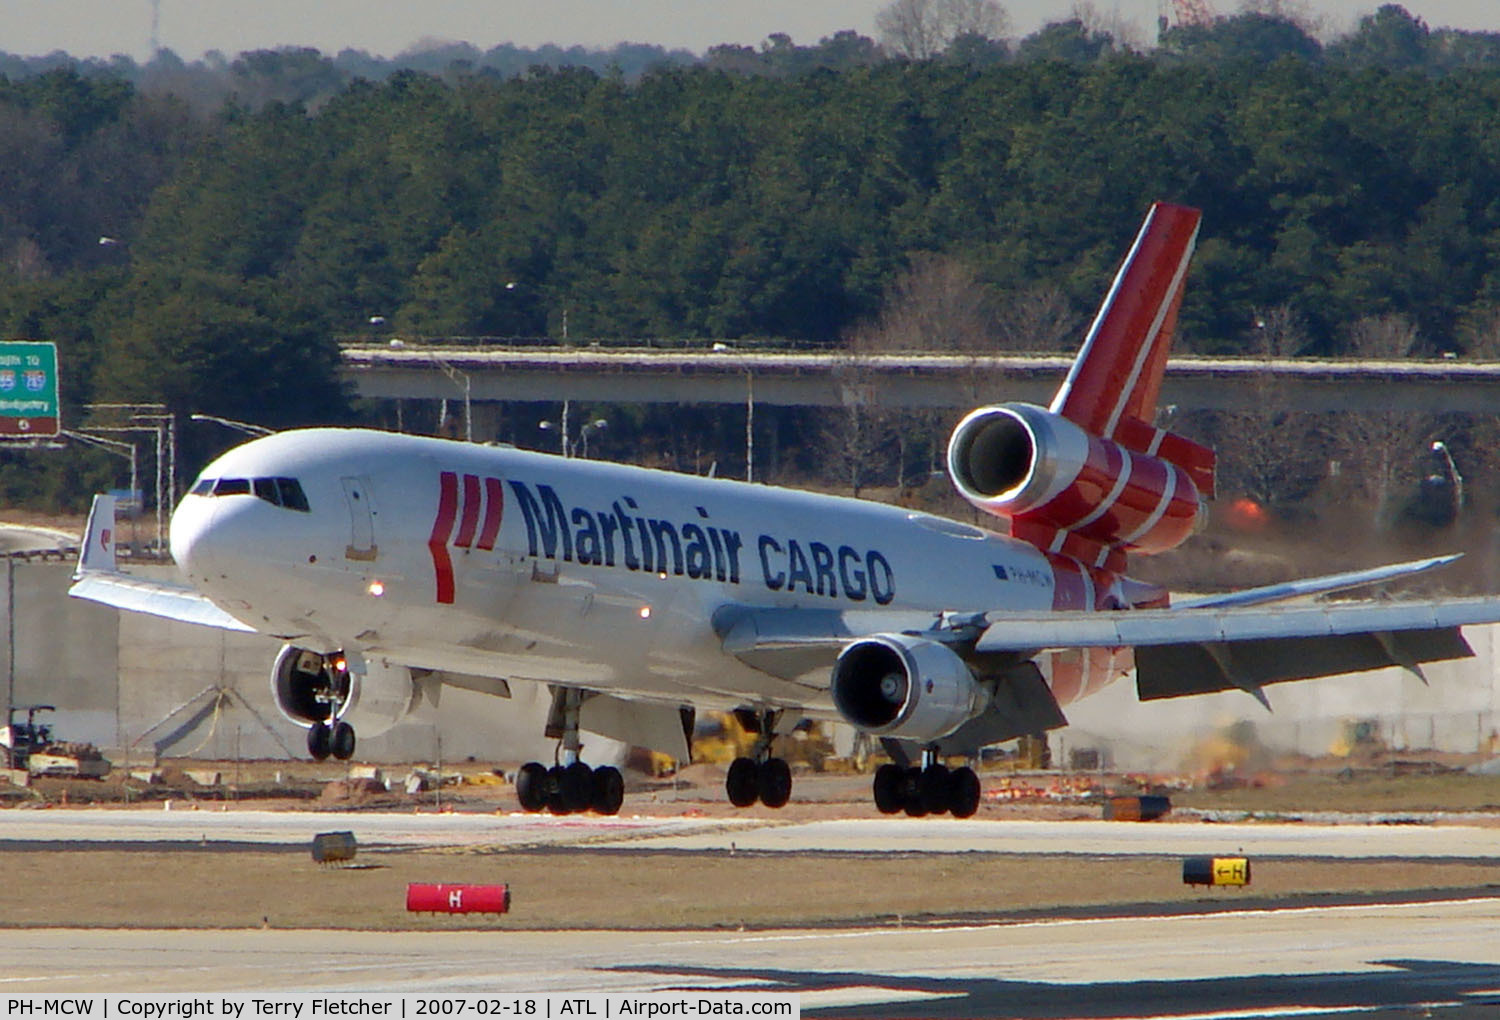 PH-MCW, 1998 McDonnell Douglas MD-11F C/N 48788, Martinair MD11 Freighter about to land at Atlanta in Feb 2007